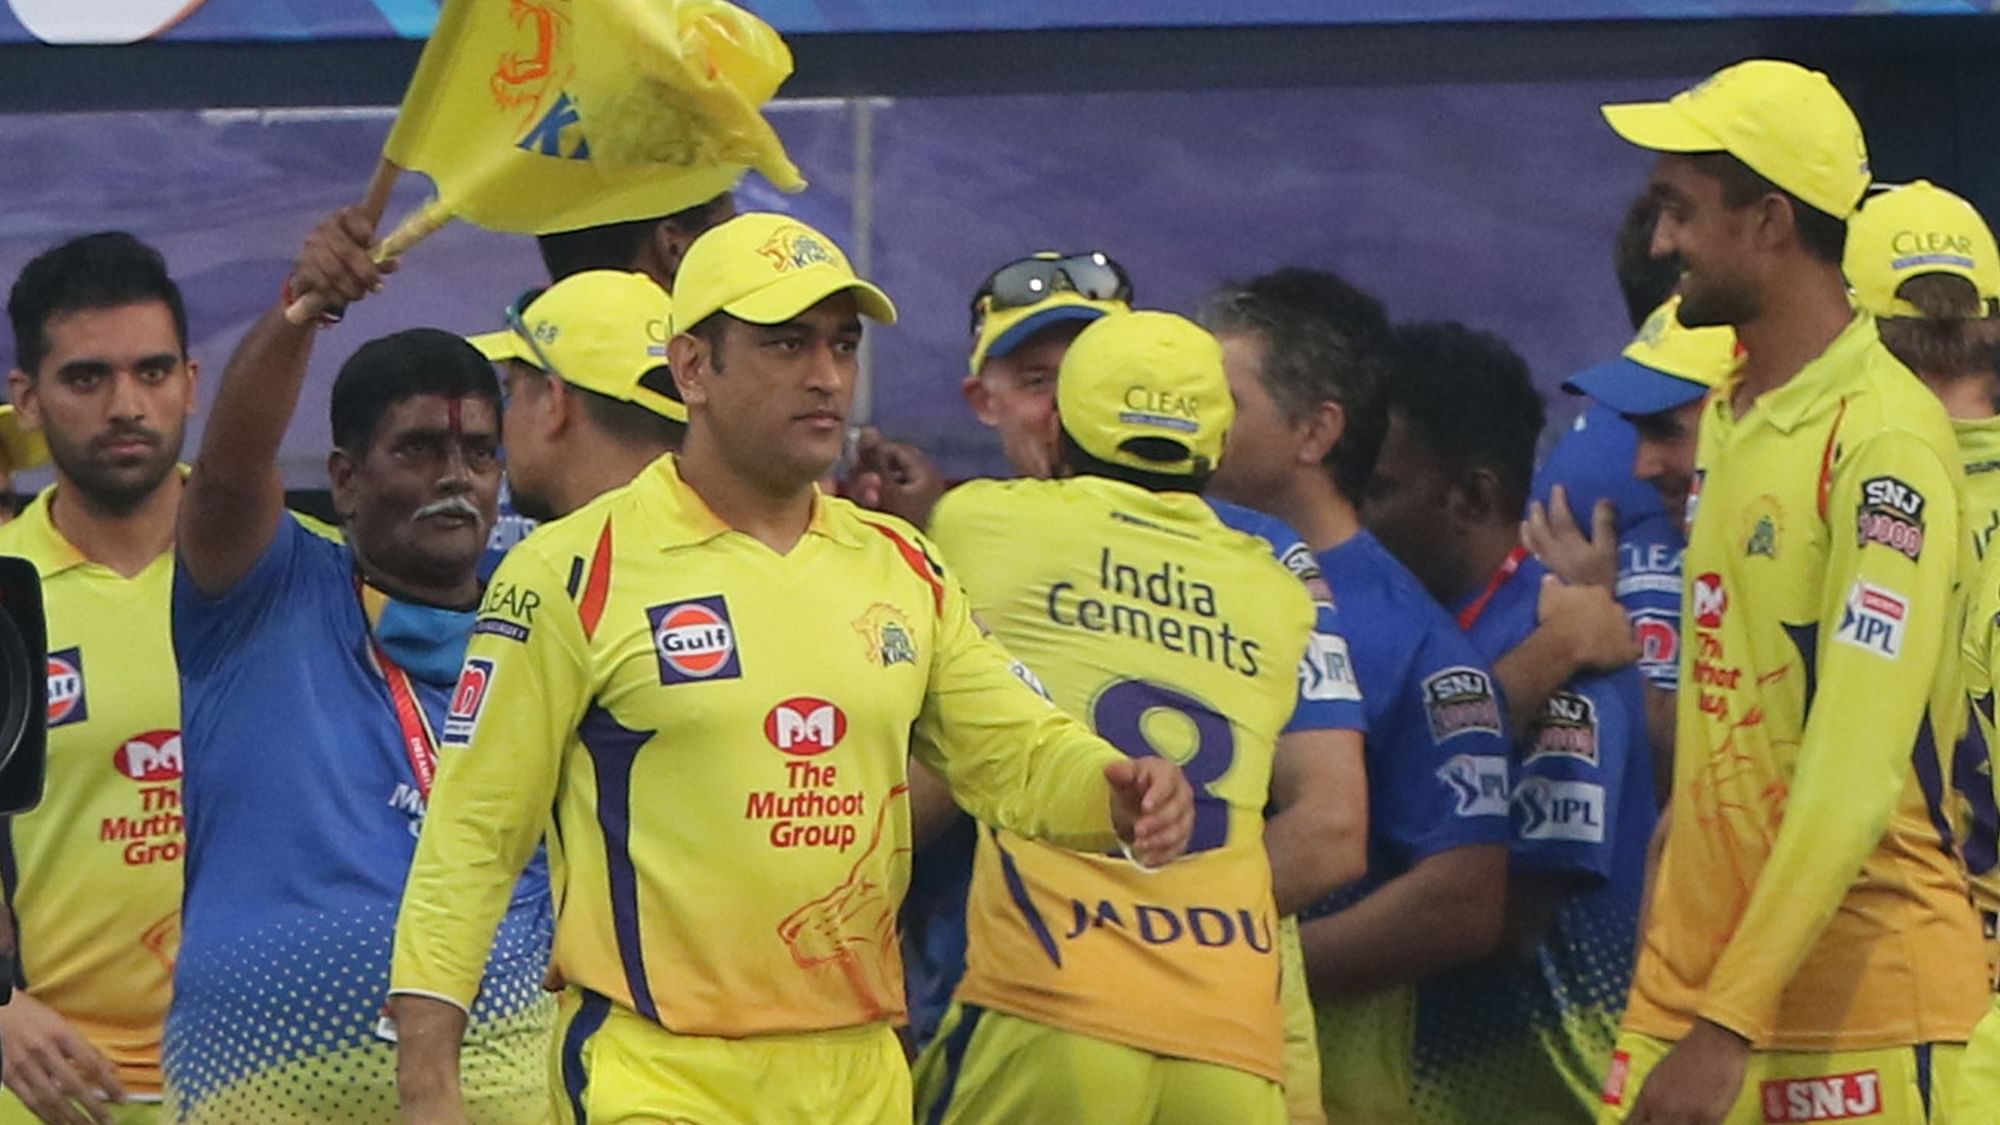 MS Dhoni confirms he is not done playing the IPL after CSK’s final match of IPL 2020.